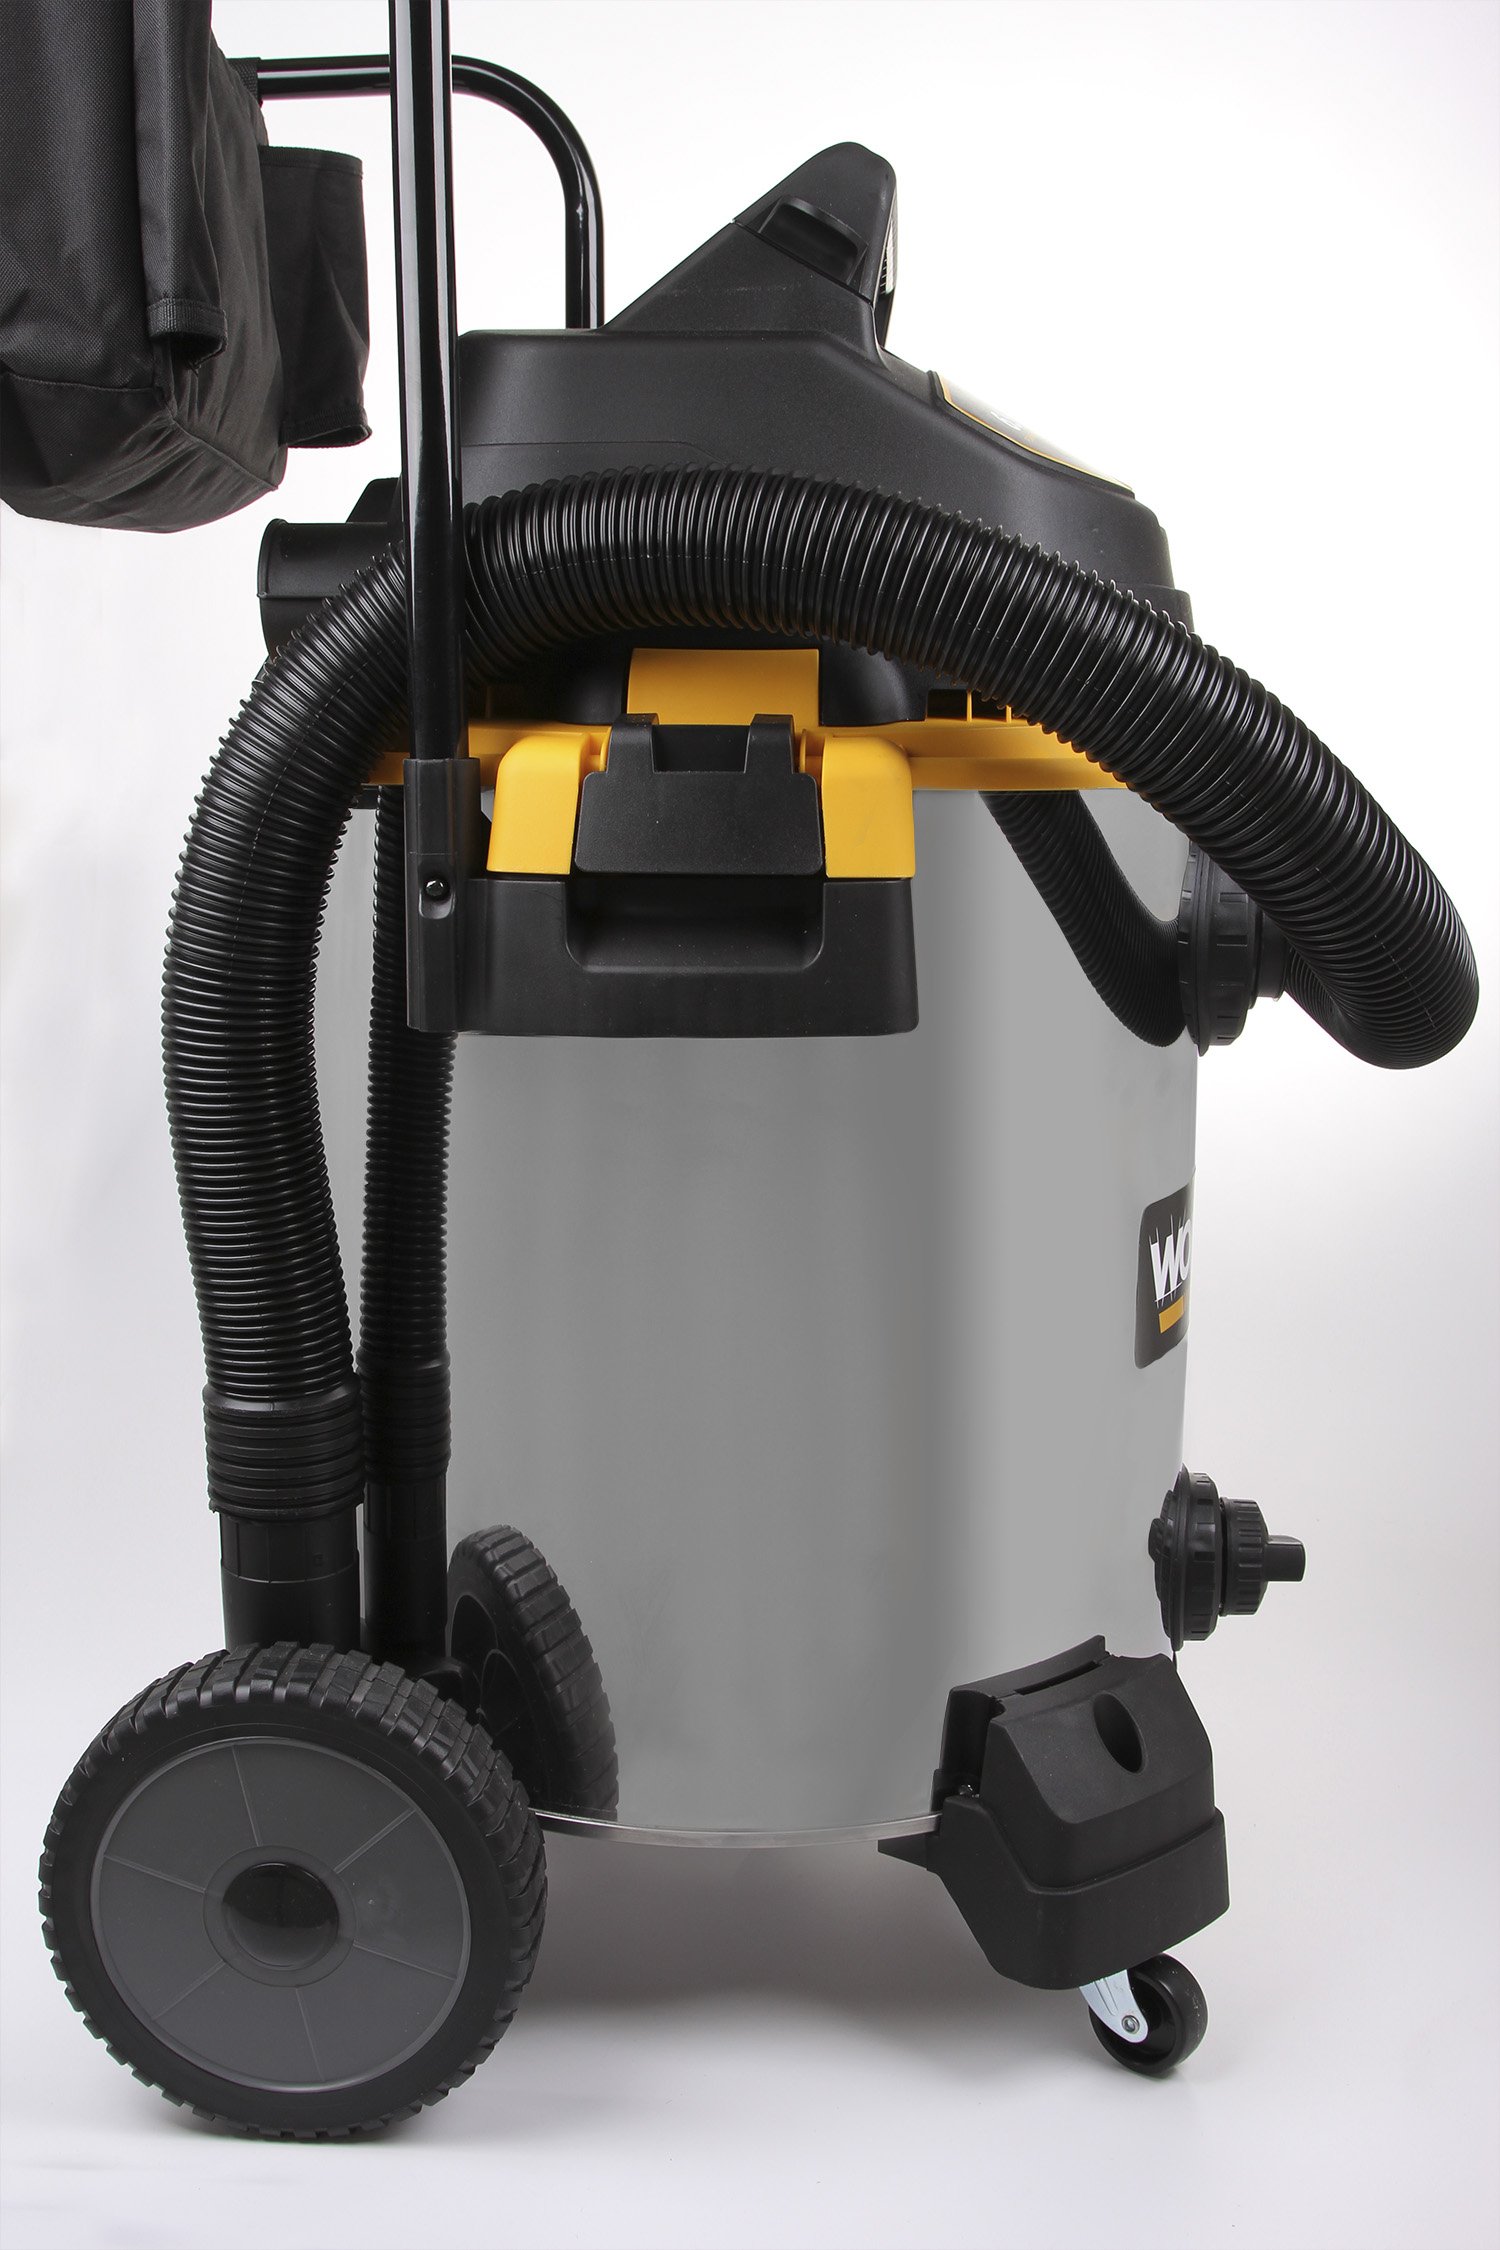 WORKSHOP Wet/Dry Vacs WS1600SS Stainless Steel 6.5-Peak Wet Dry Vacuum Cleaner, 16 Gallon w/ attachment and hose